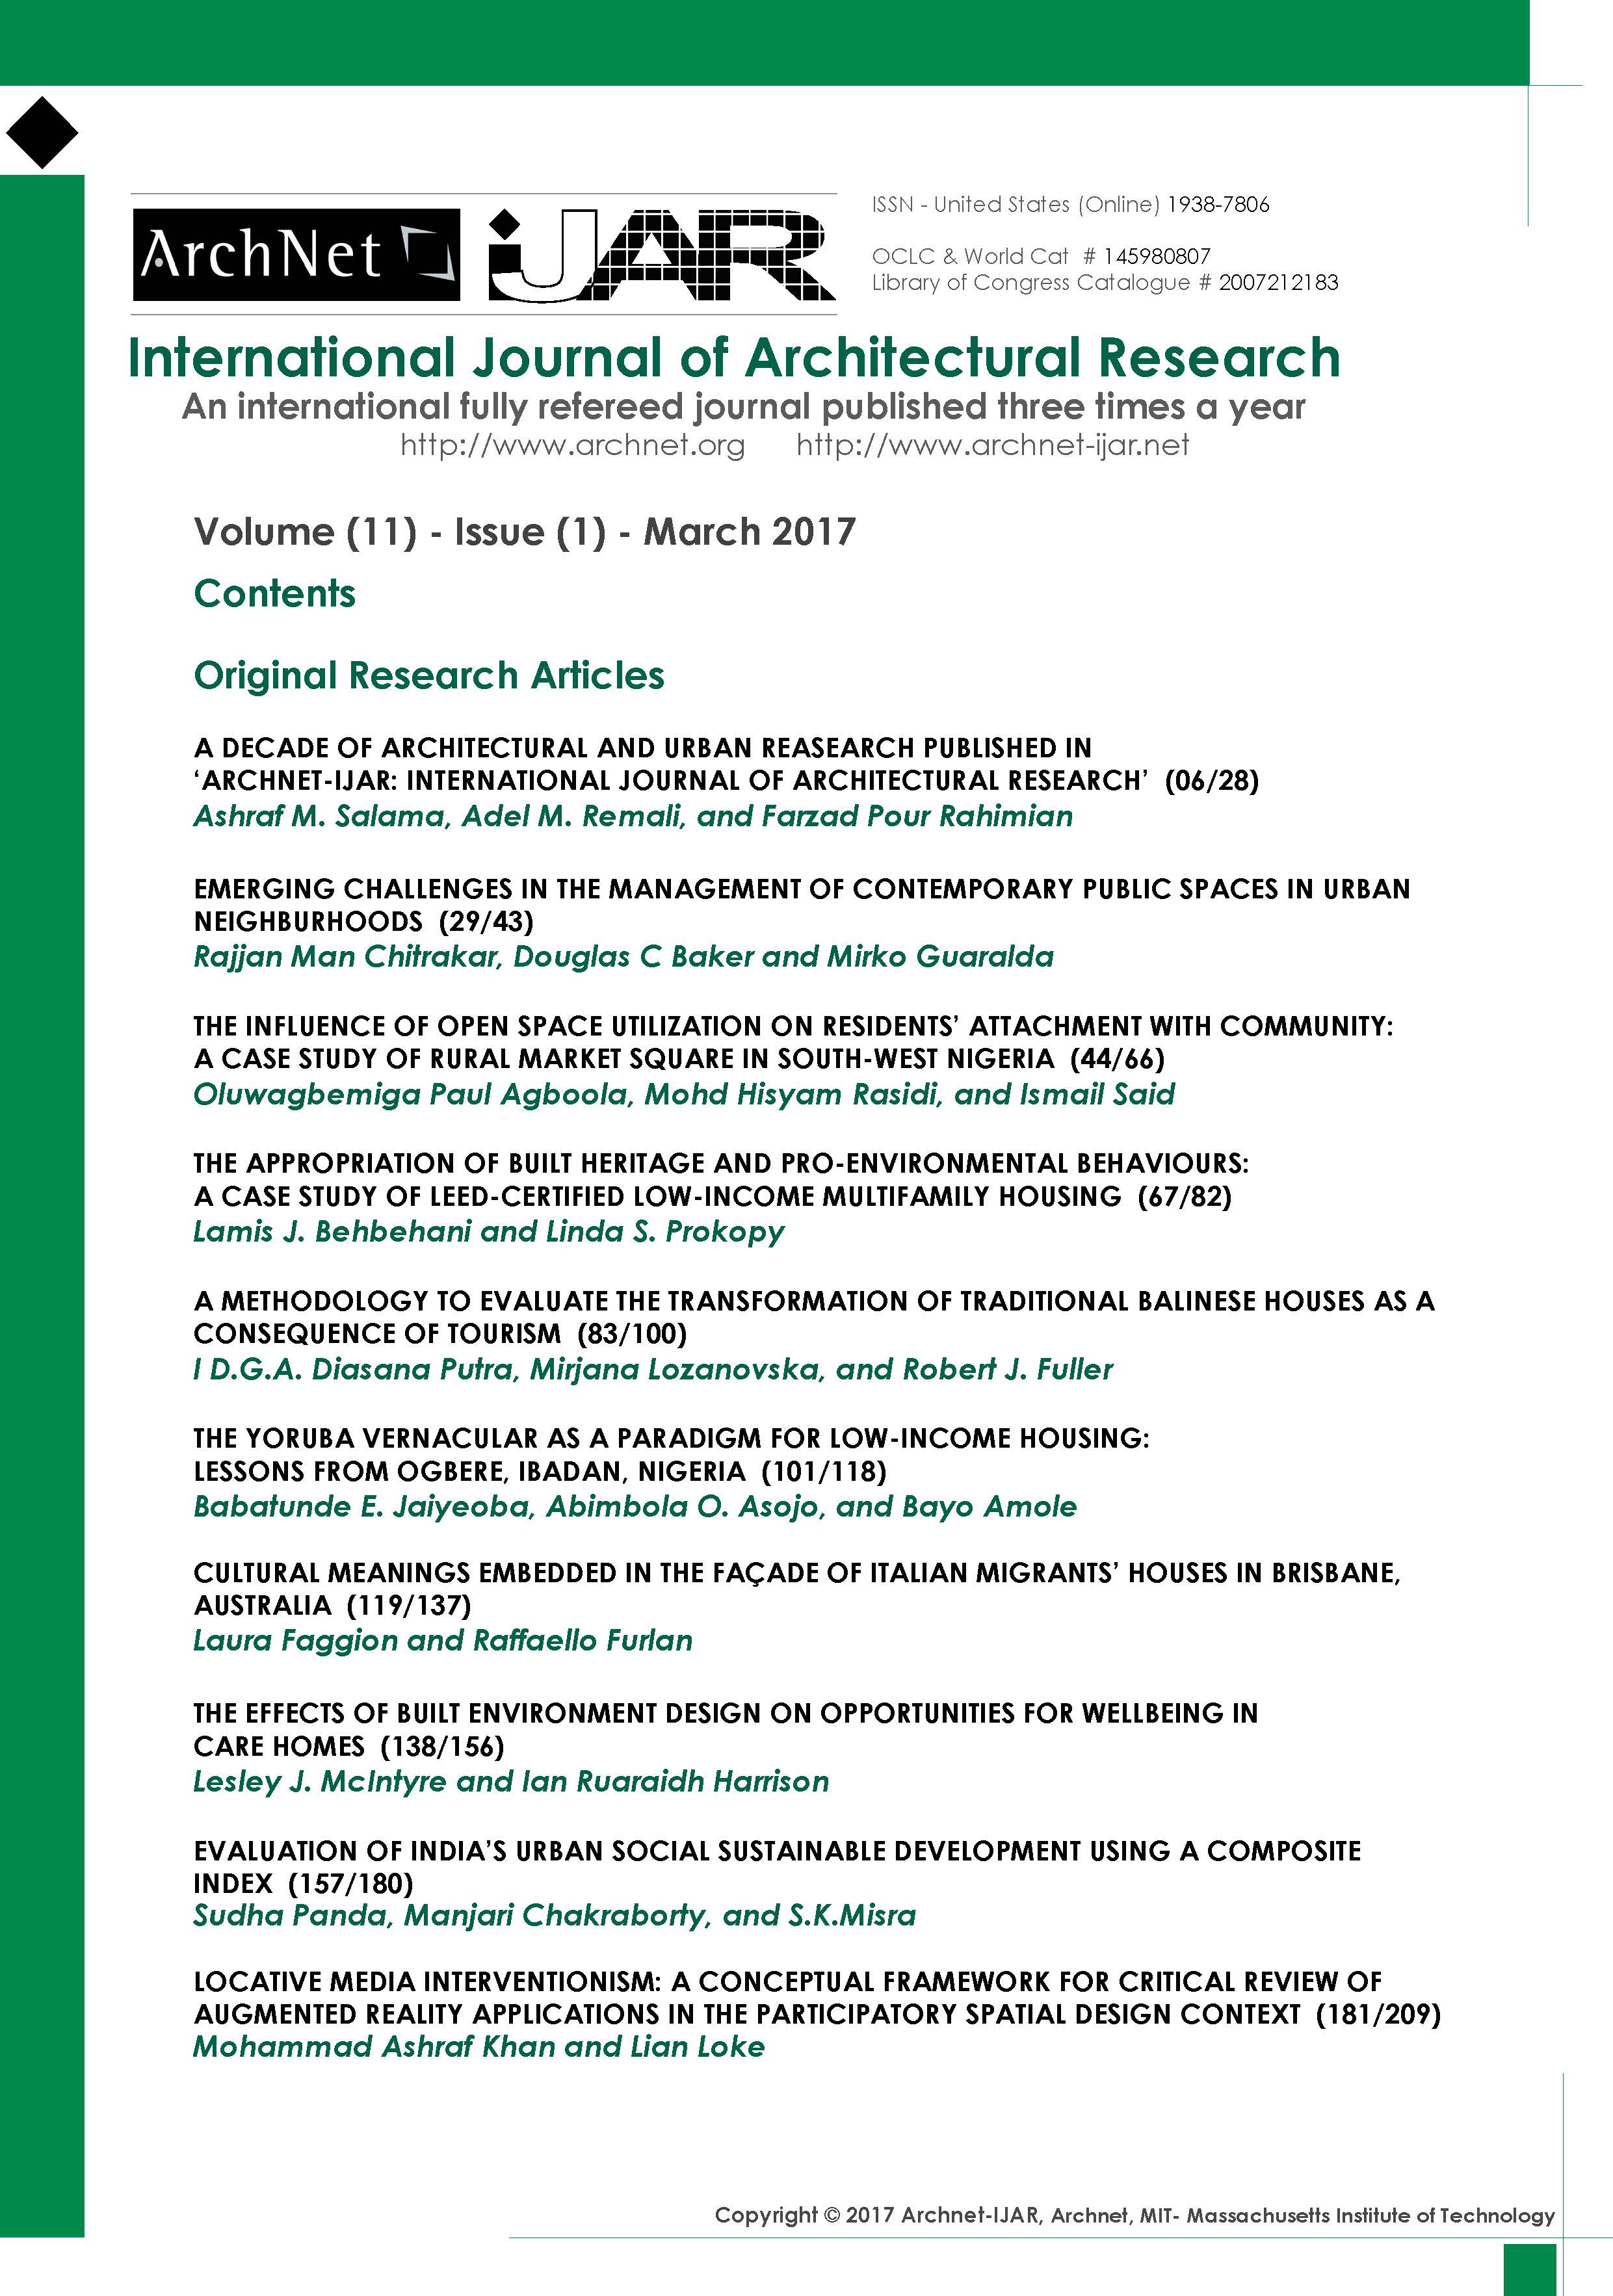 Farzad Pour Rahimian - <div style="text-align: justify;"><span style="color: rgb(1, 1, 1);">Archnet-IJAR International Journal of Architectural Research is an interdisciplinary, fully-refereed scholarly online journal of architecture, planning, and built environment studies. Two international boards (advisory and editorial) ensure the quality of scholarly papers and allow for a comprehensive academic review of contributions spanning a wide spectrum of issues, methods, theoretical approaches and architectural and development practices.</span><span class="apple-converted-space" style="color: rgb(1, 1, 1);">&nbsp;</span><br></div><div style="text-align: justify;"><span style="color: rgb(1, 1, 1);"><br></span></div><span style="color: rgb(1, 1, 1); background-image: initial; background-position: initial; background-size: initial; background-repeat: initial; background-attachment: initial; background-origin: initial; background-clip: initial;"><div style="text-align: justify;">ArchNet-IJAR provides a comprehensive academic review of a wide spectrum of issues, methods, and theoretical approaches. It aims to bridge theory and practice in the fields of architectural/design research and urban planning/built environment studies, reporting on the latest research findings and innovative approaches for creating responsive environments.</div></span>